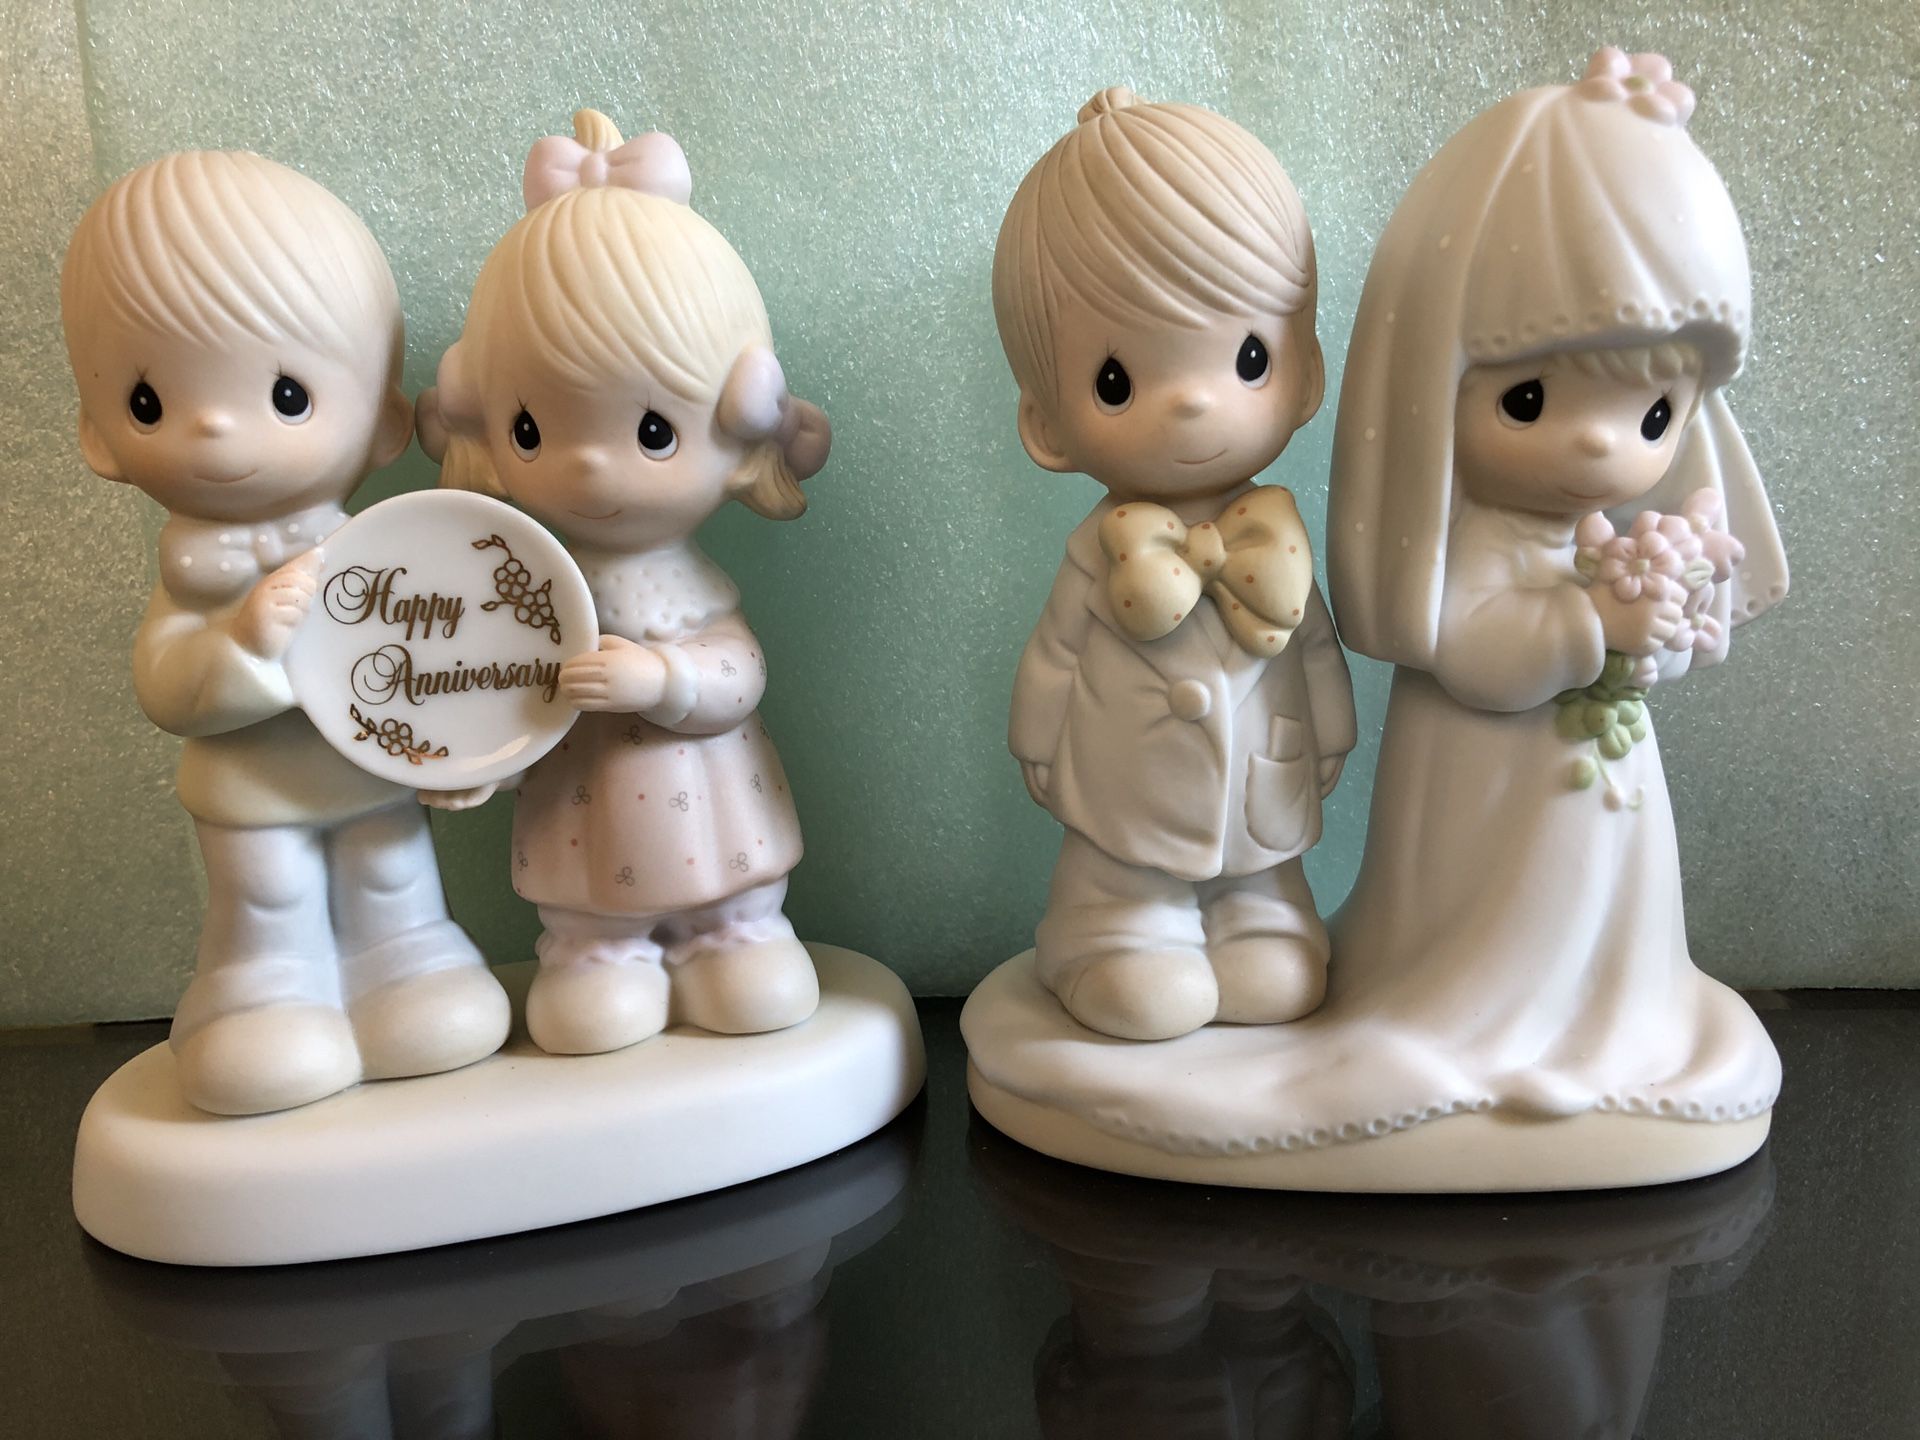 Precious Moments Wedding & Anniversary editions $10 Each. Sold separately or together